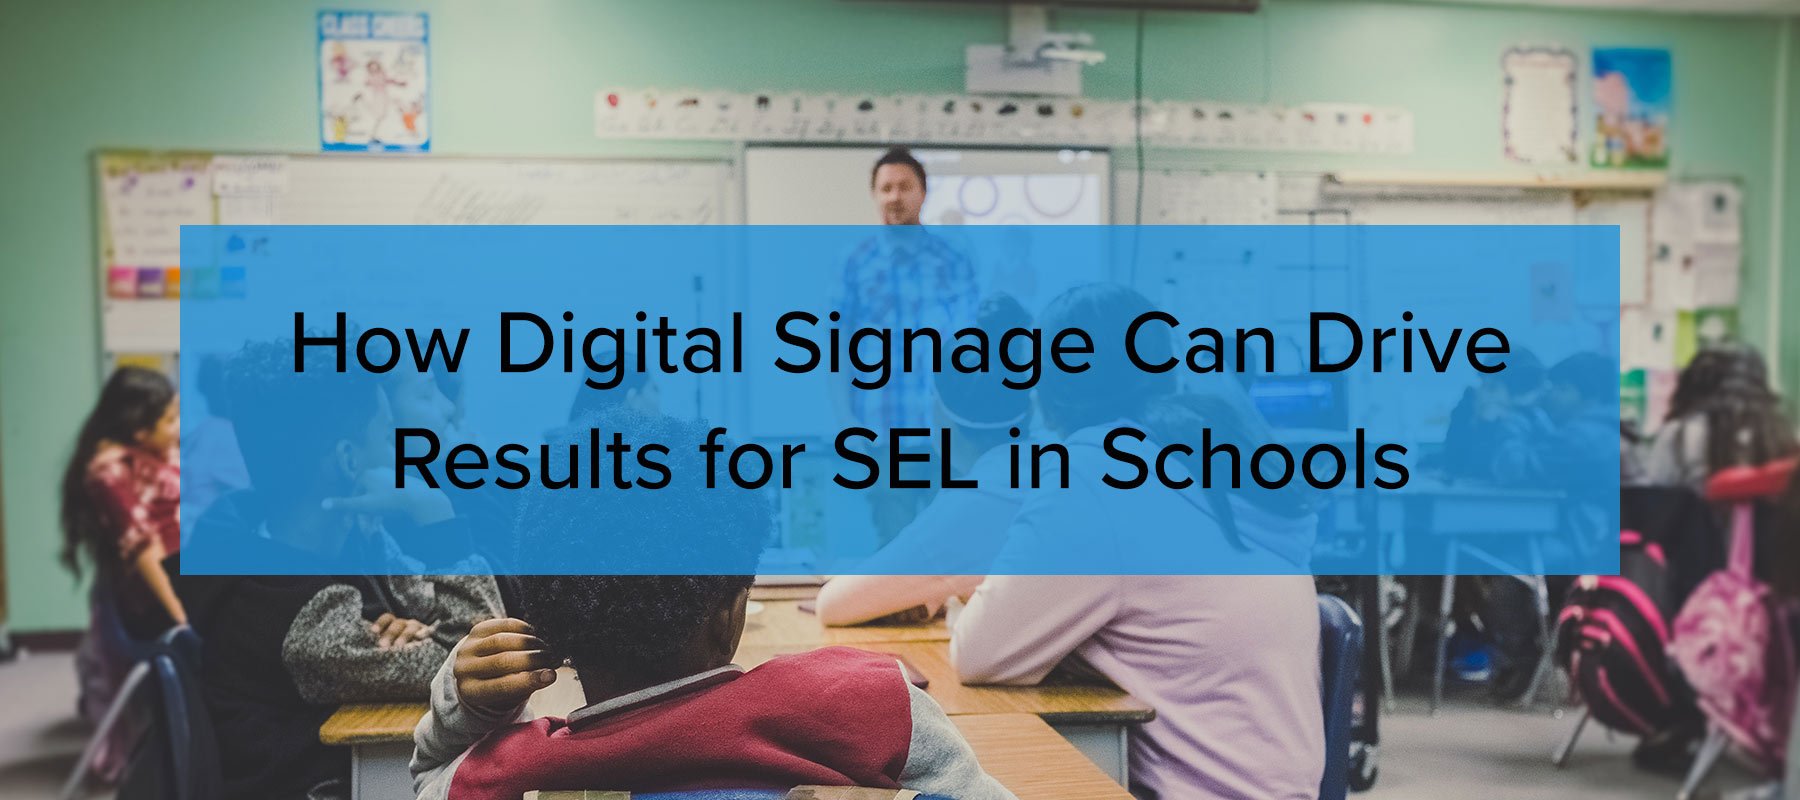 How Digital Signage Can Drive Results for Social Emotional Learning in Schools